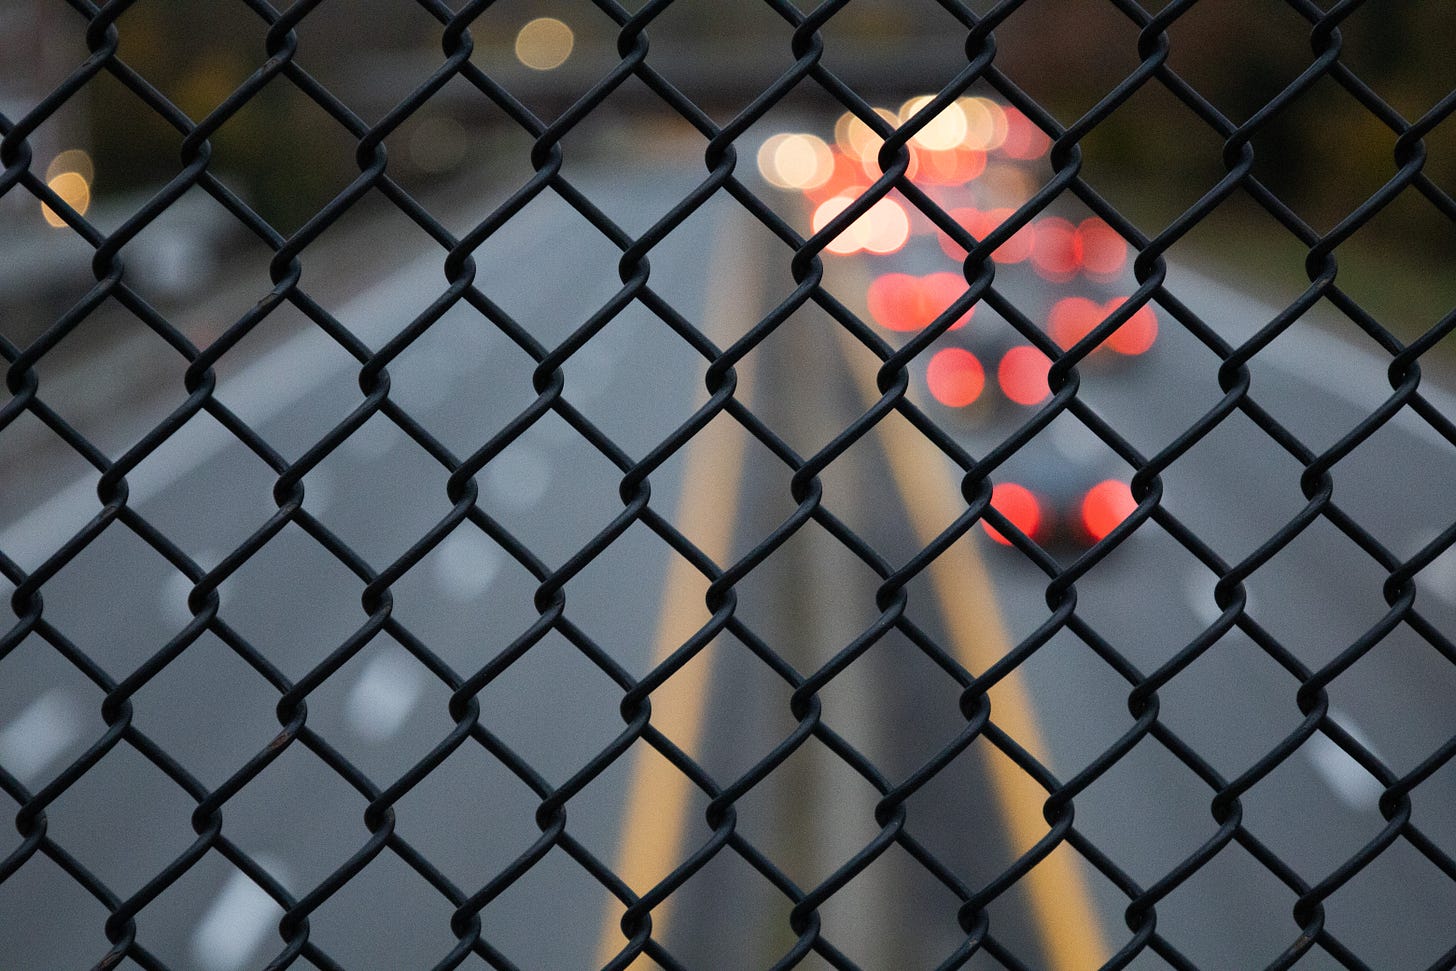 Brake lights out of focus through a chain link fence